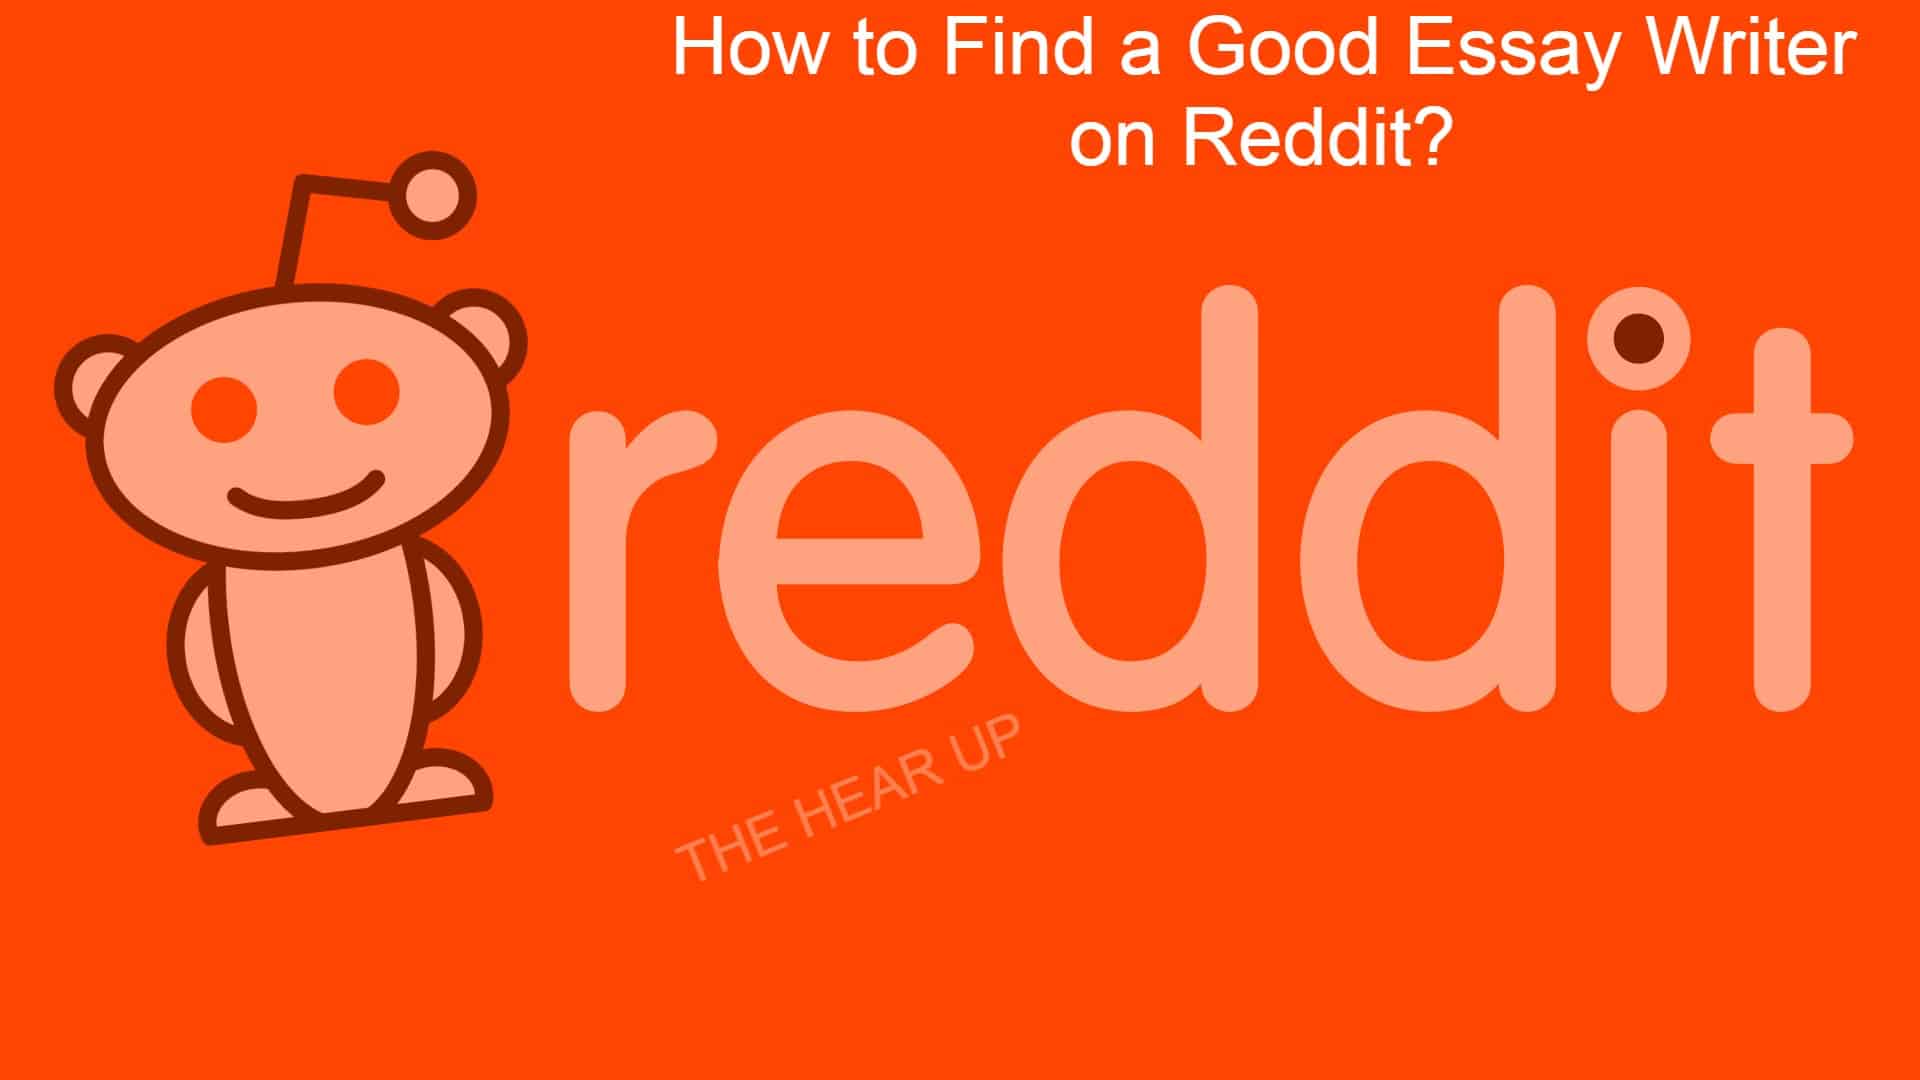 How to Find a Good Essay Writer on Reddit?